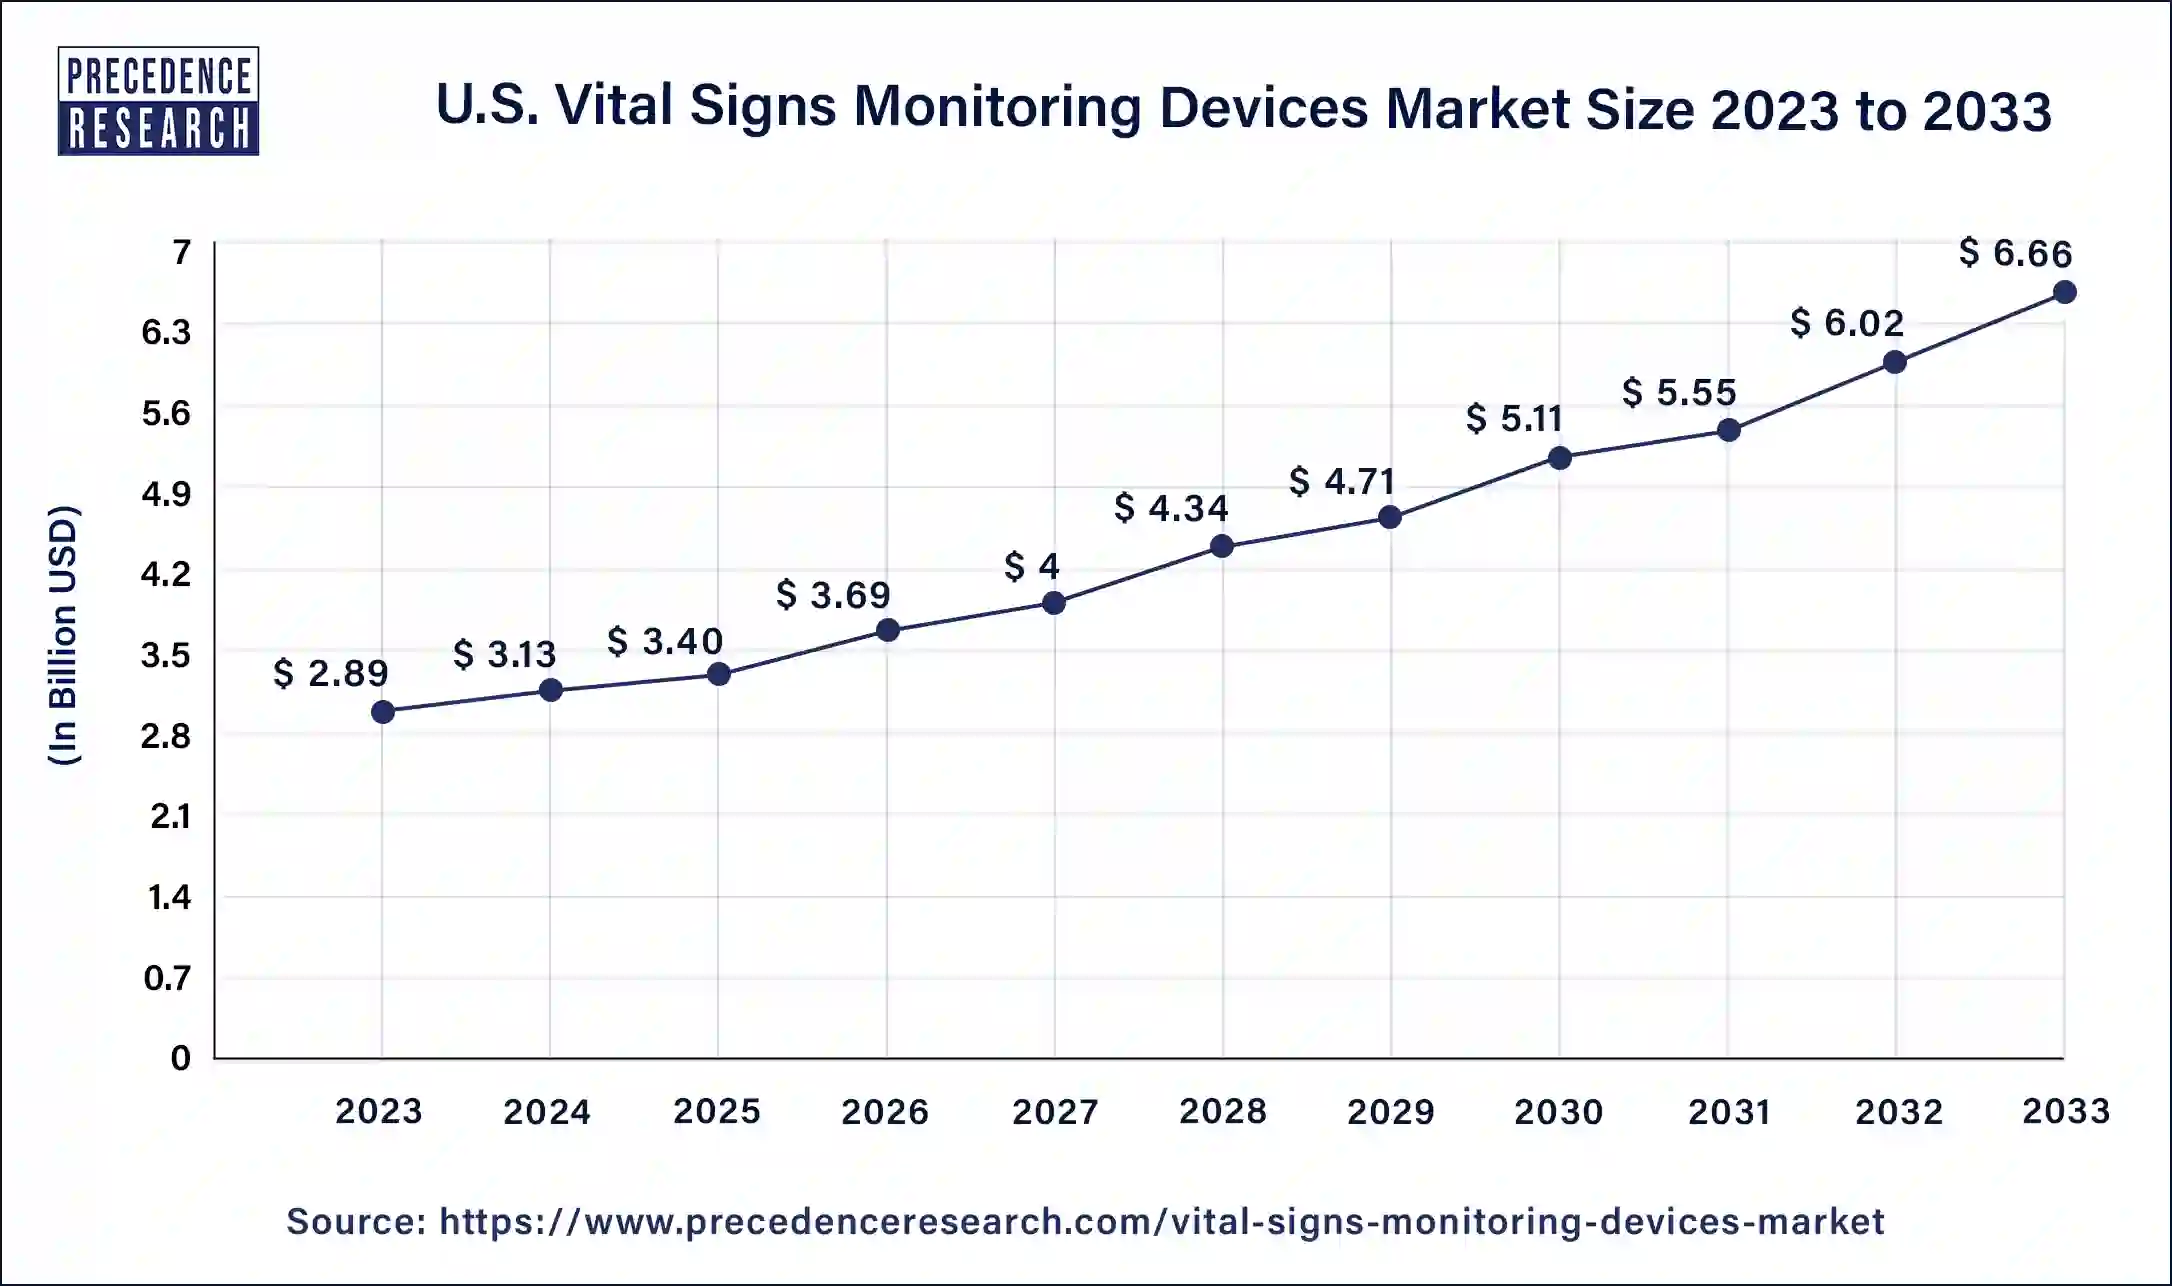 U.S. Vital Signs Monitoring Devices Market Size 2024 to 2033